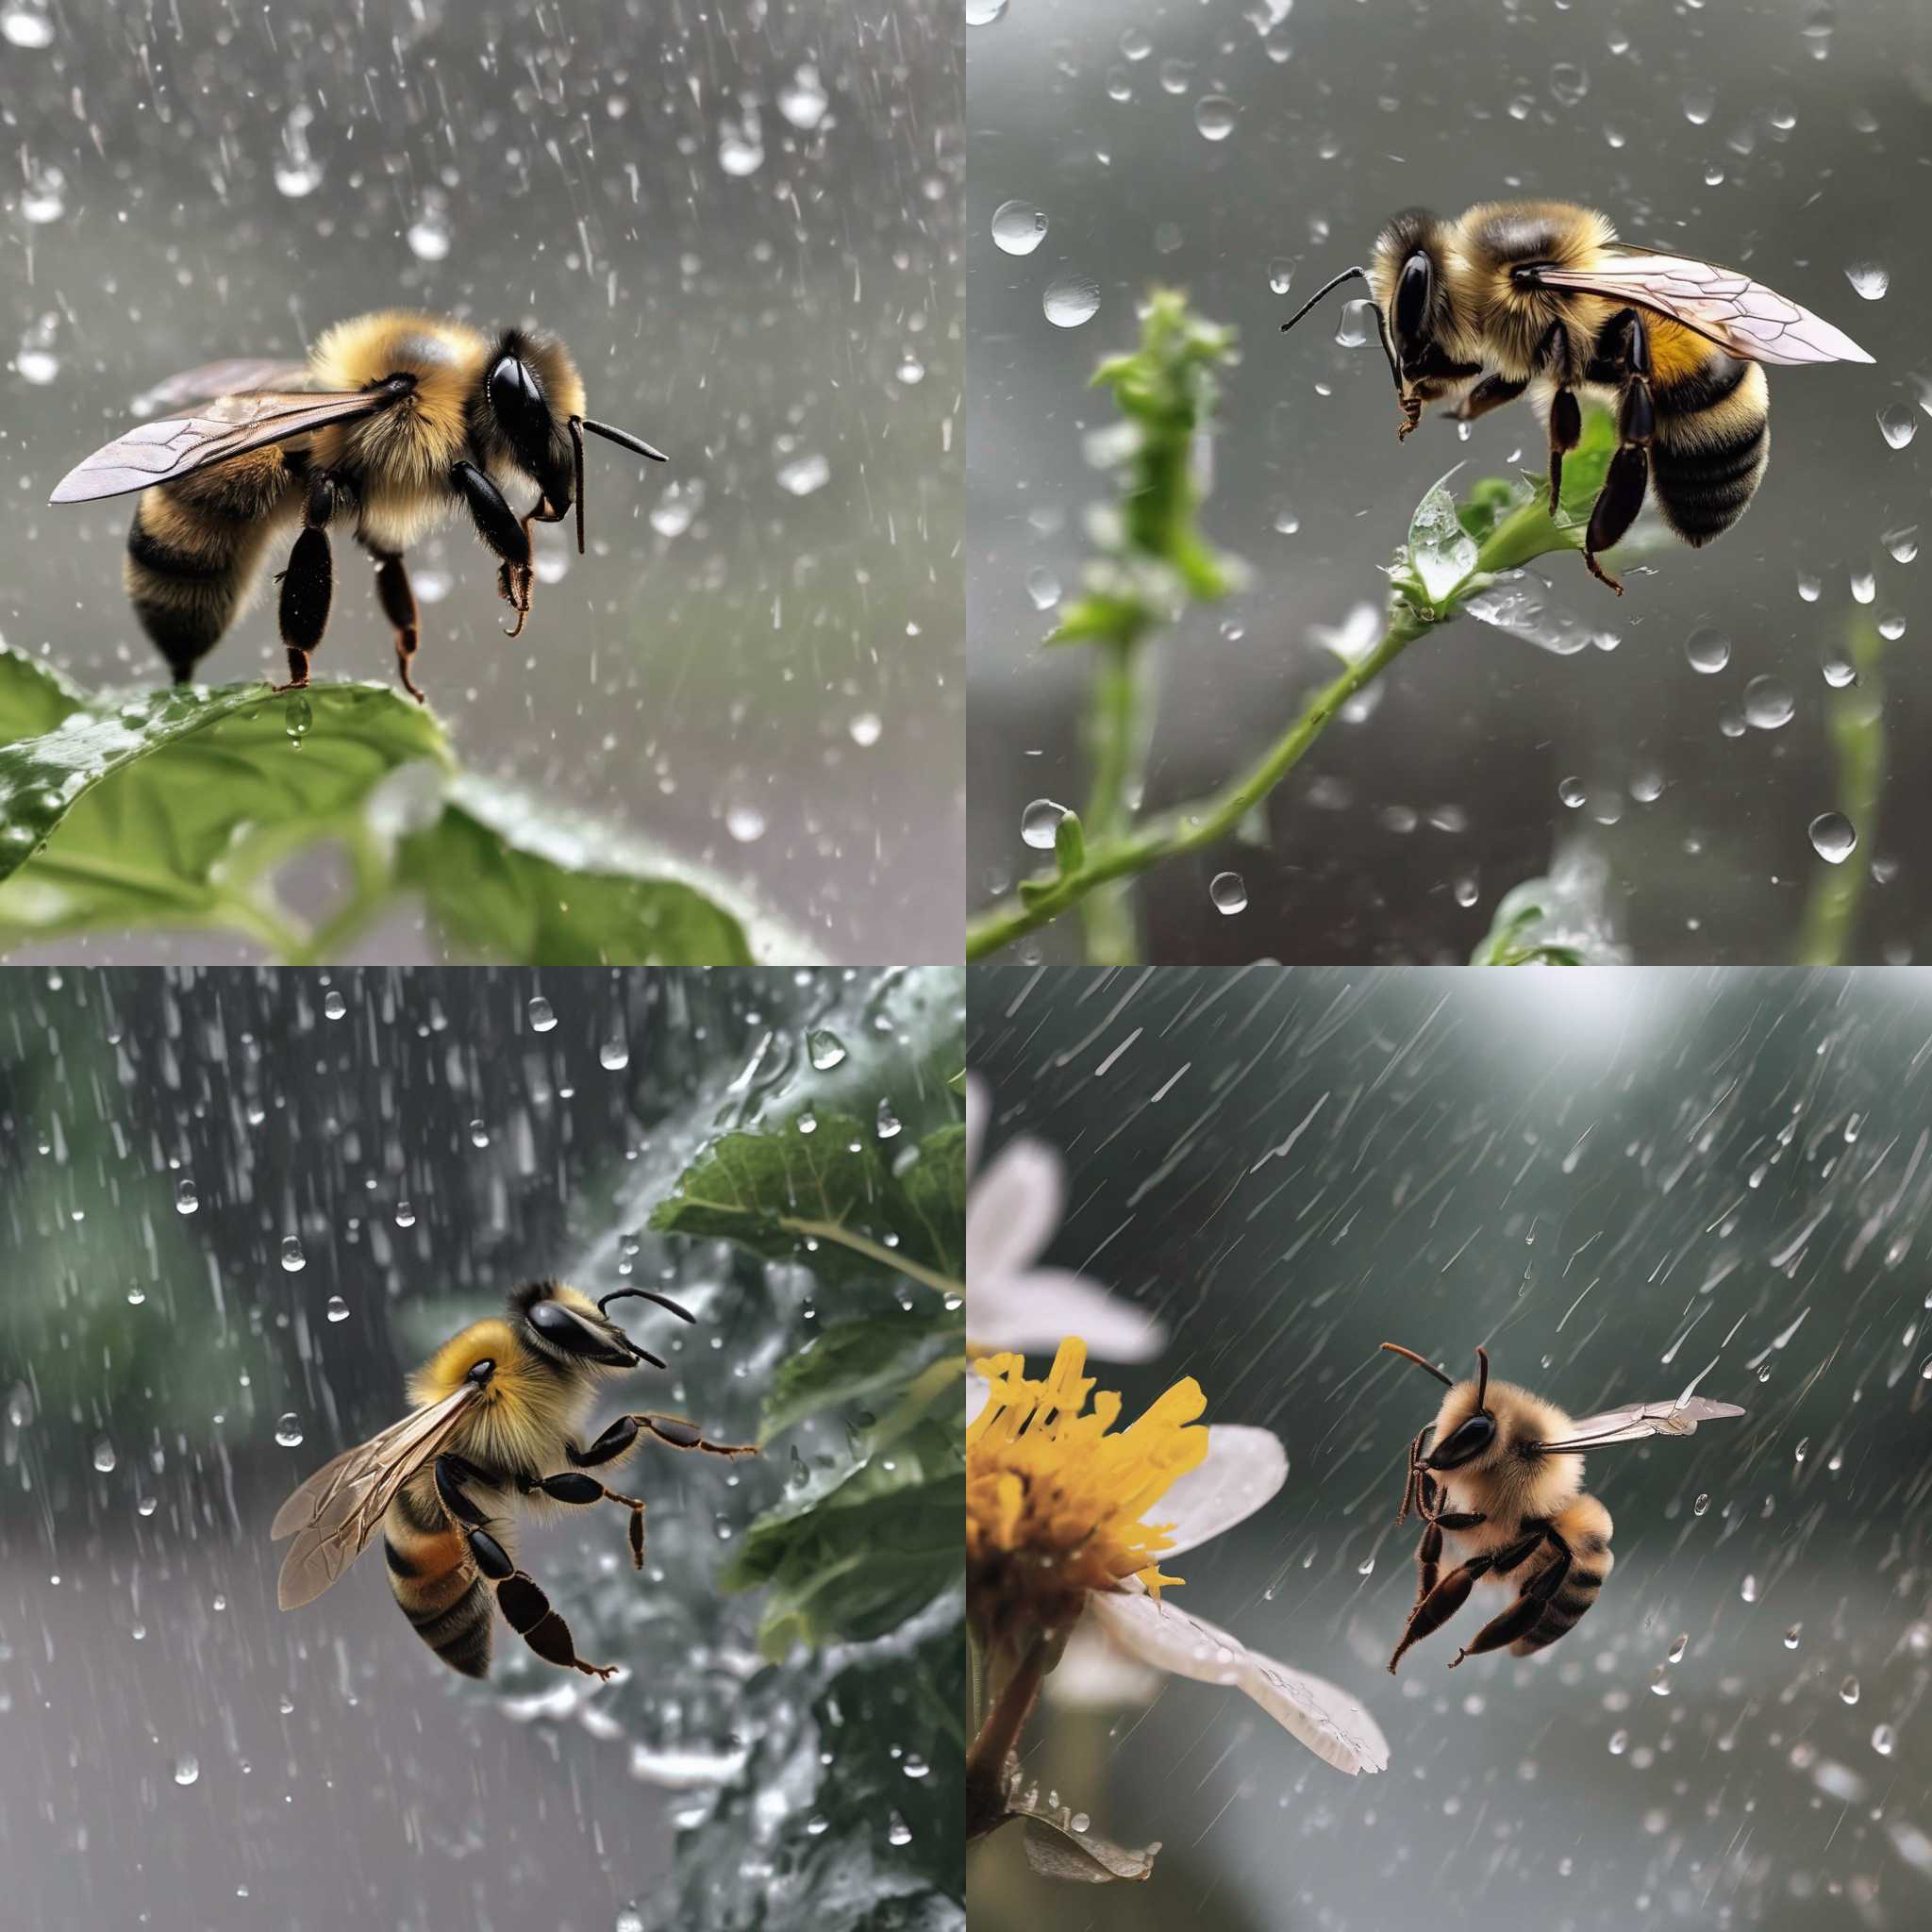 A bee on a rainy day